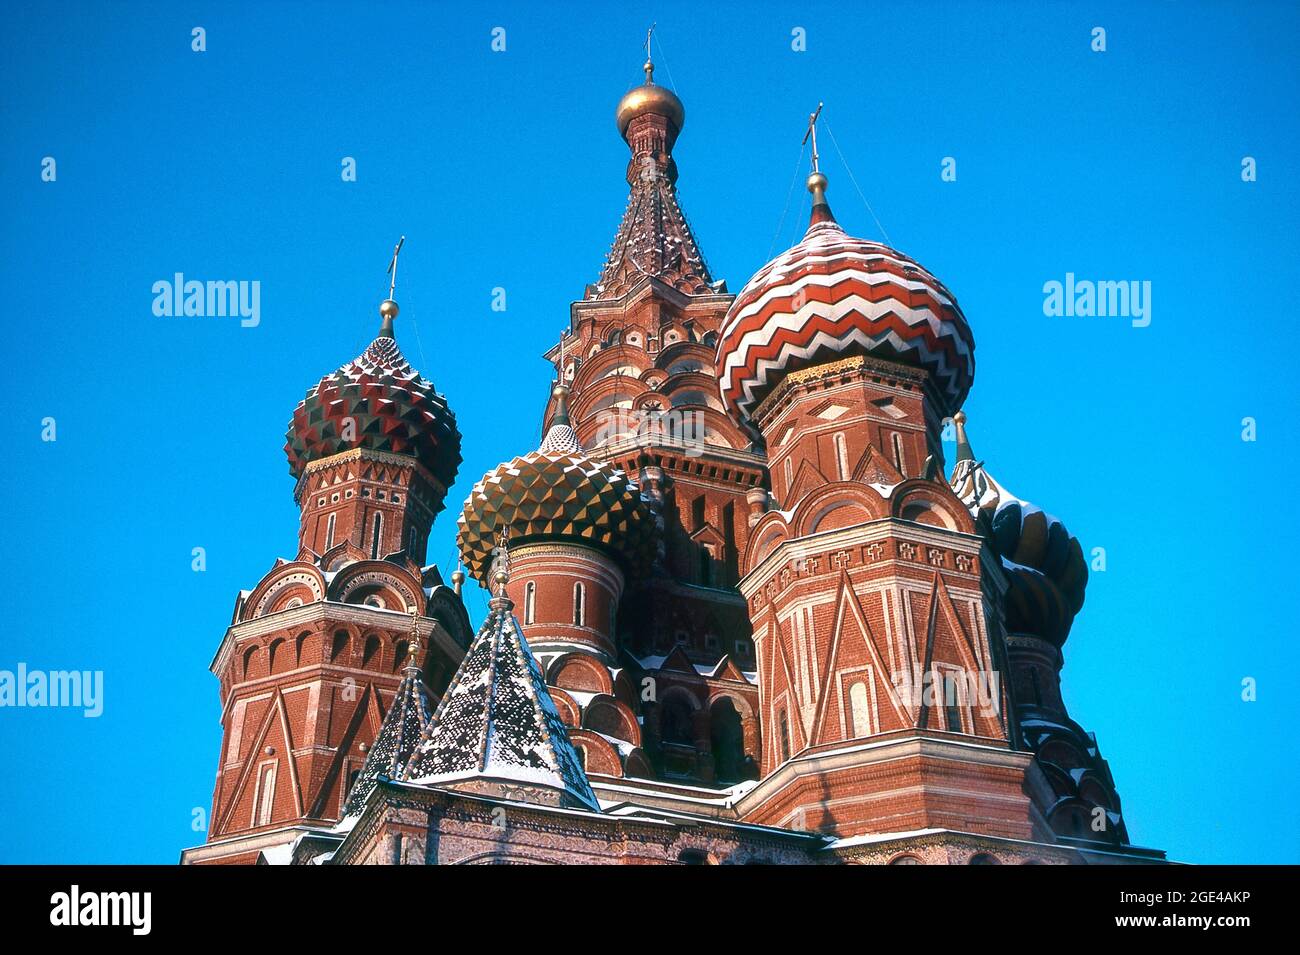 St Basil's Cathedral with snow, Red Square, Moscow, Russia Stock Photo